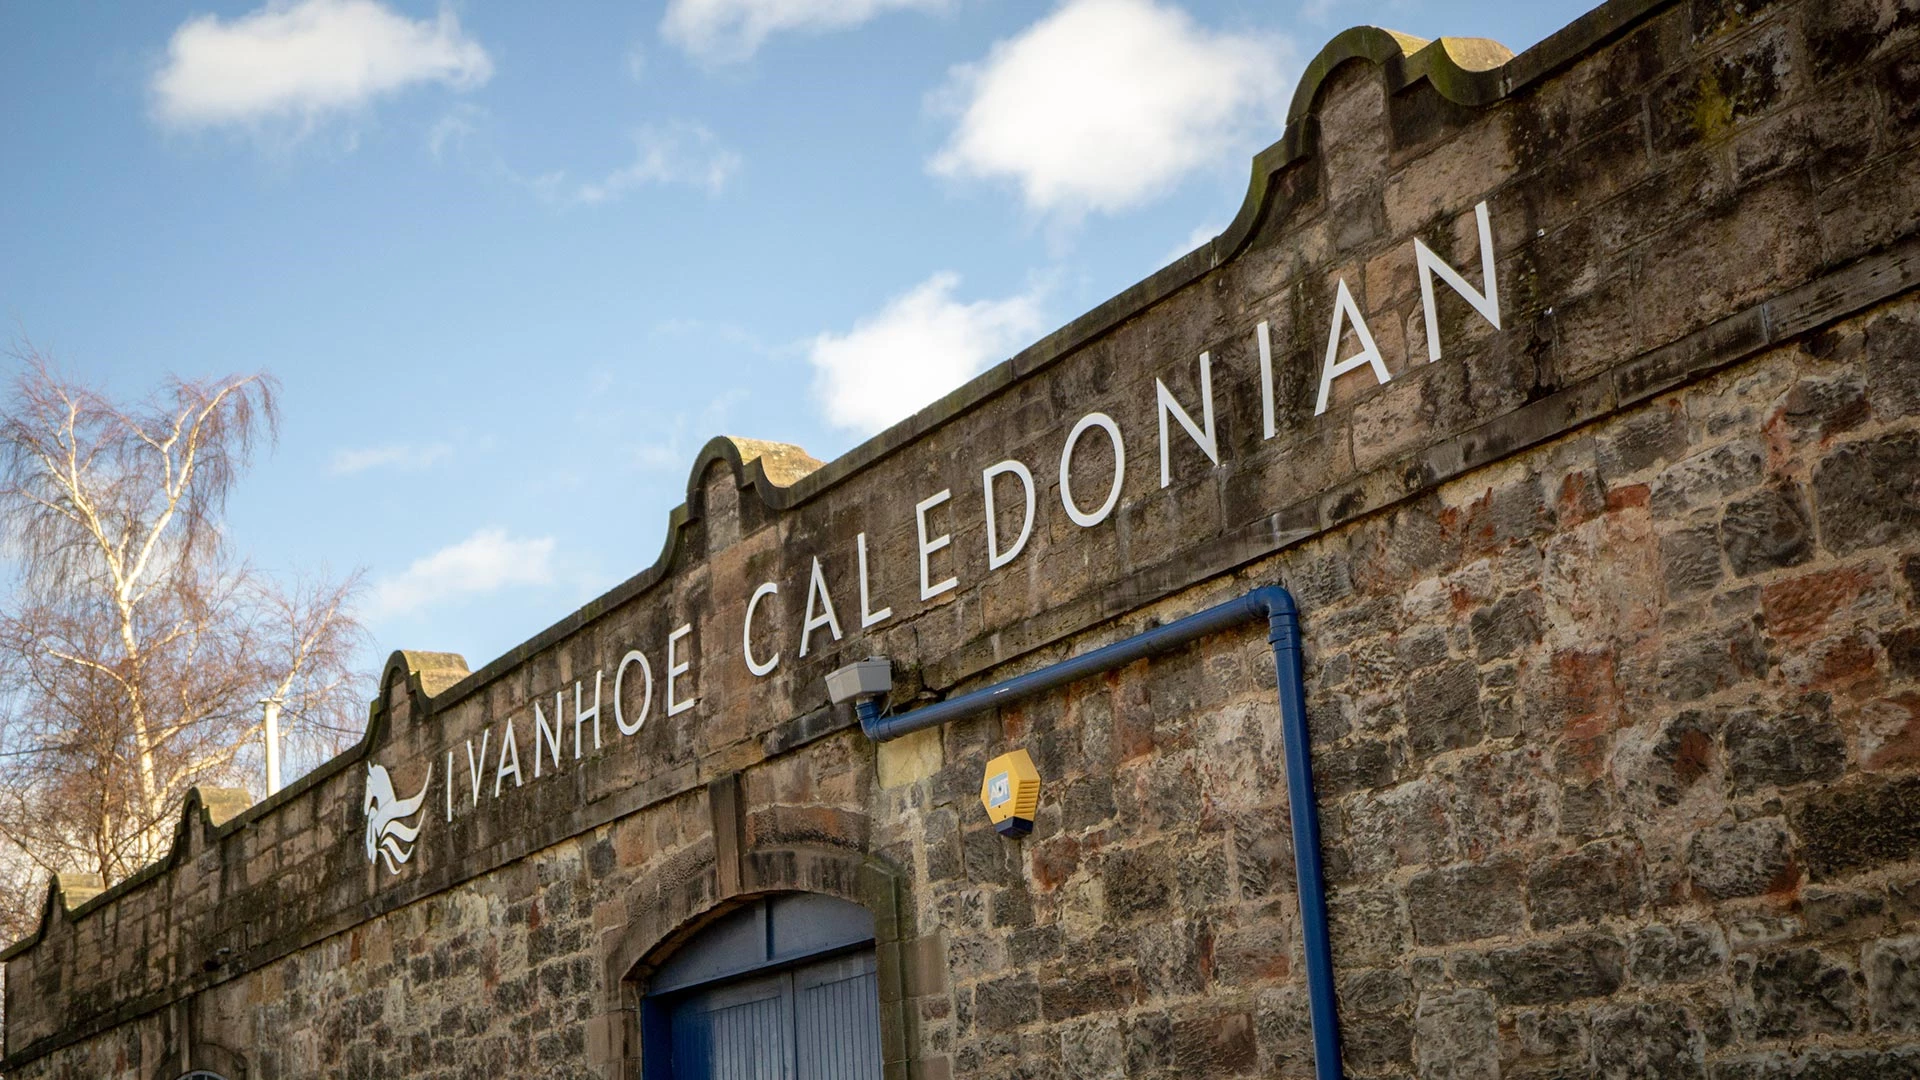 Ivanhoe Caledonian secures £100,000 working capital loan from Business Loans Scotland